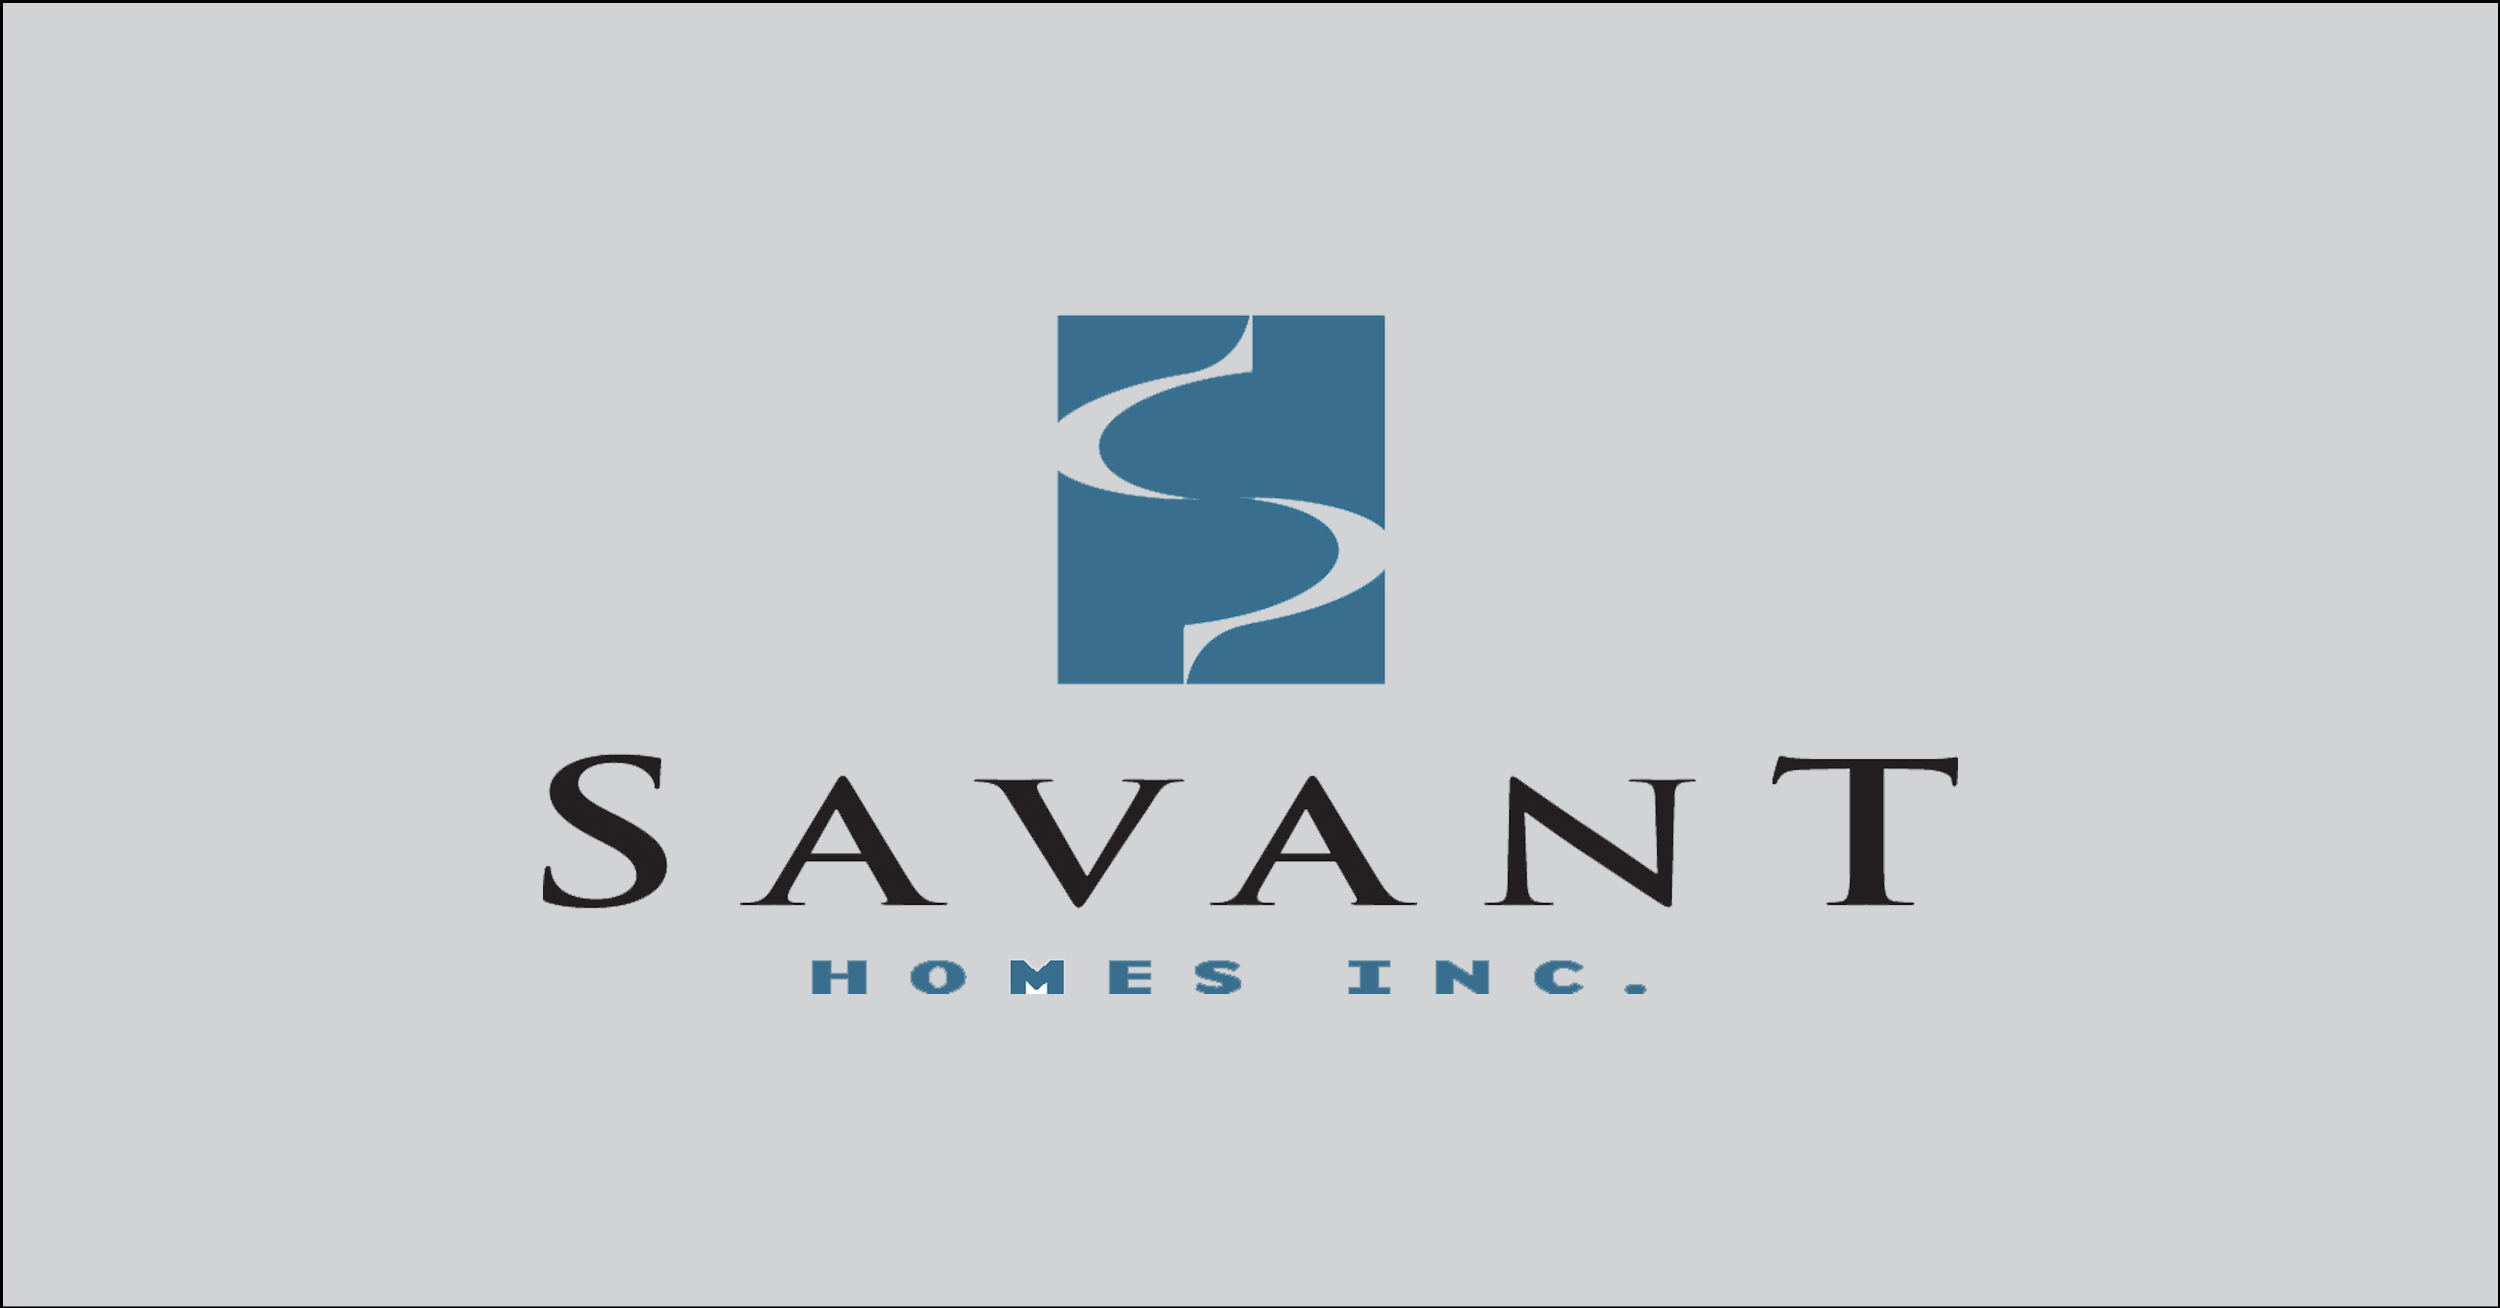 Find new construction or search for new homes and communities by Savant Homes in Colorado